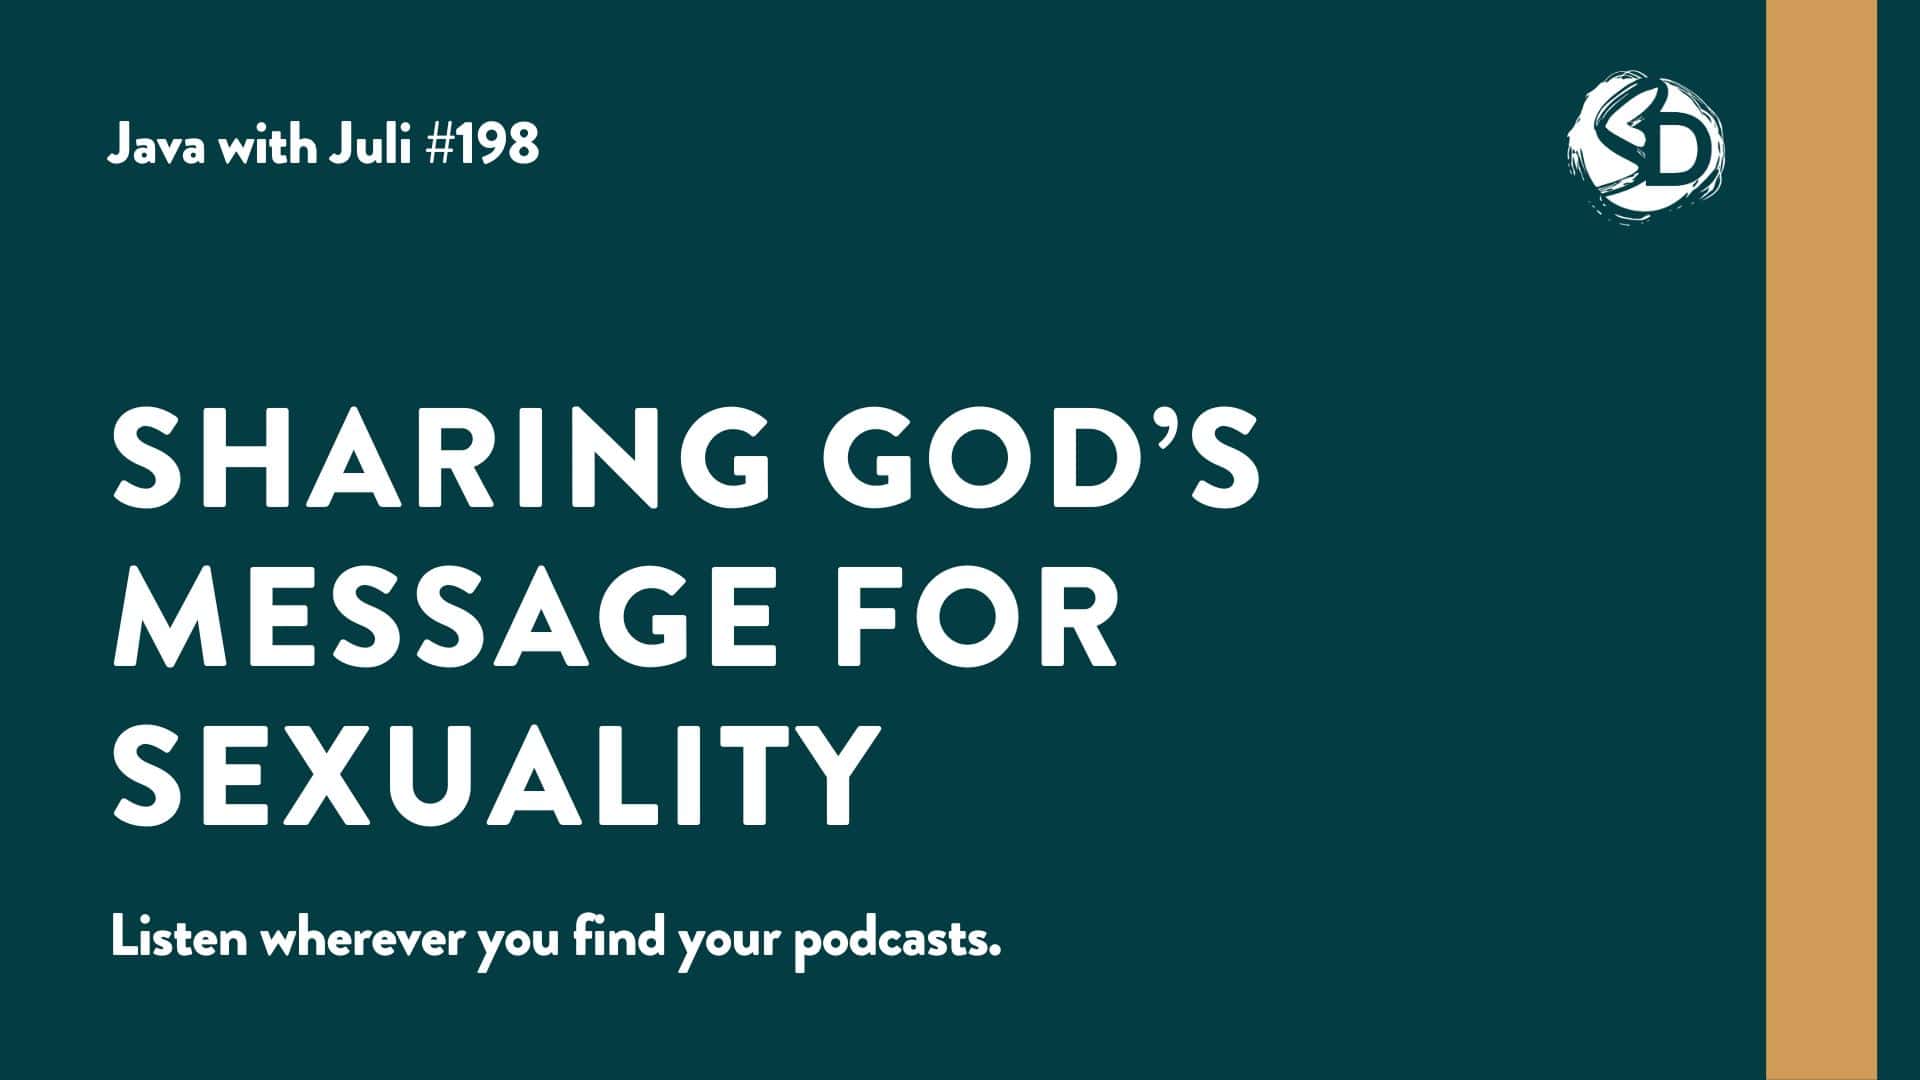 #198: Sharing God’s Message for Sexuality